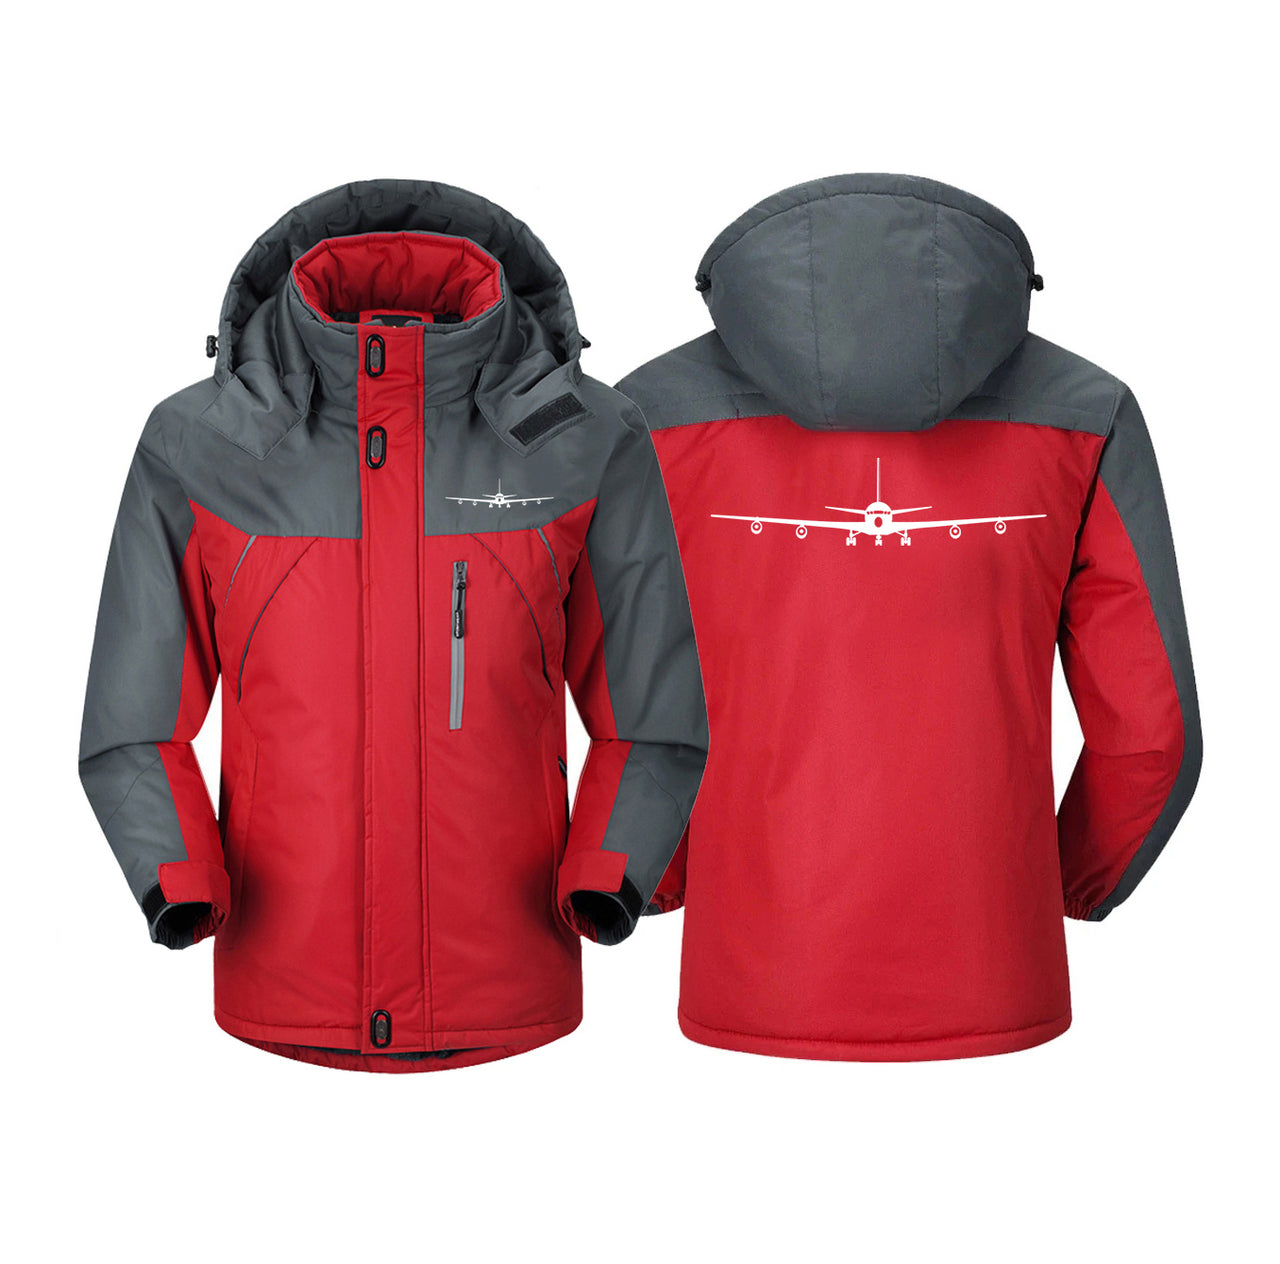 Boeing 707 Silhouette Designed Thick Winter Jackets